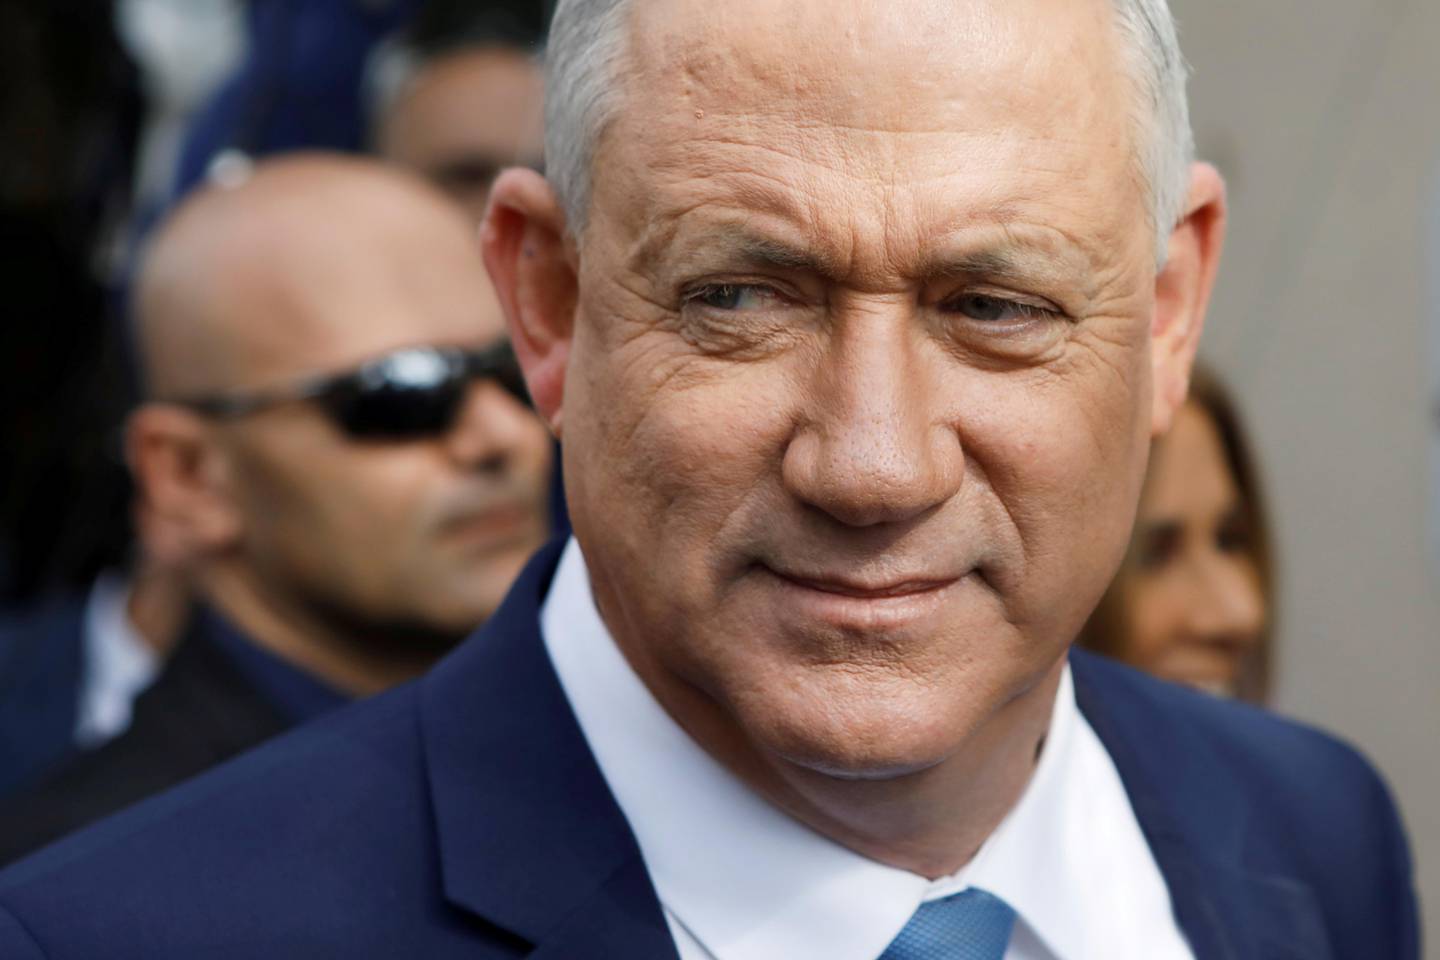 FILE PHOTO: Leader of Blue and White party, Benny Gantz looks on after voting at a polling station in Israel's national election in Rosh Ha'ayin, Israel March 2, 2020. REUTERS/Nir Elias/File Photo